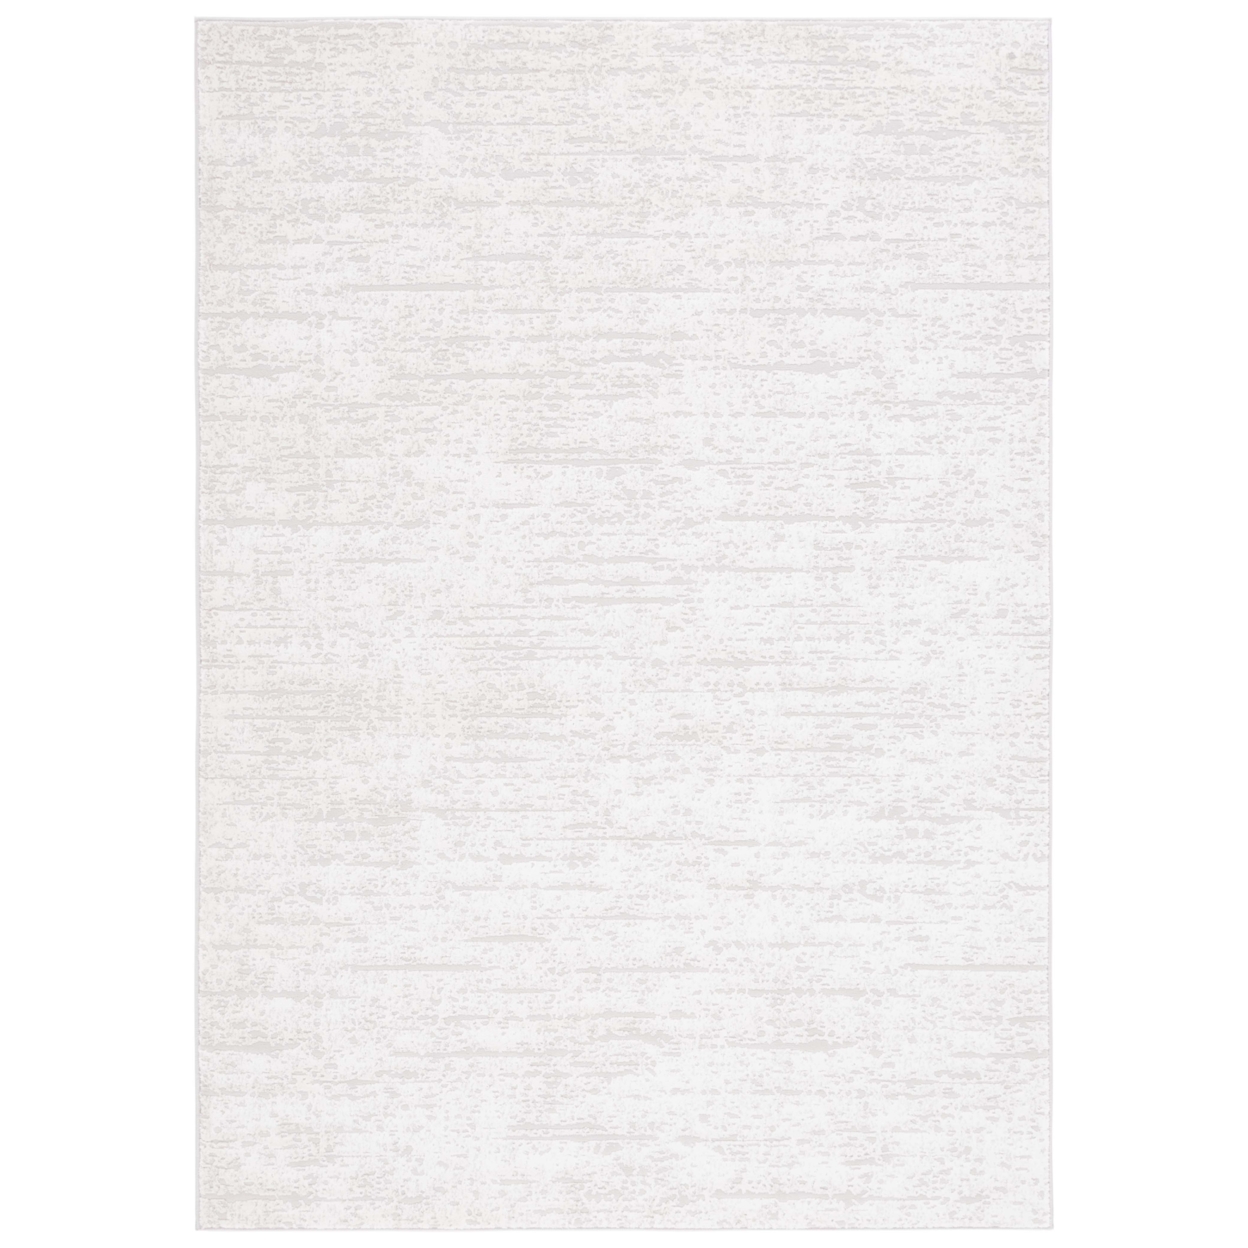 Safavieh CON104A Continental Ivory / Beige - Ivory / Black, 9' X 12' Rectangle